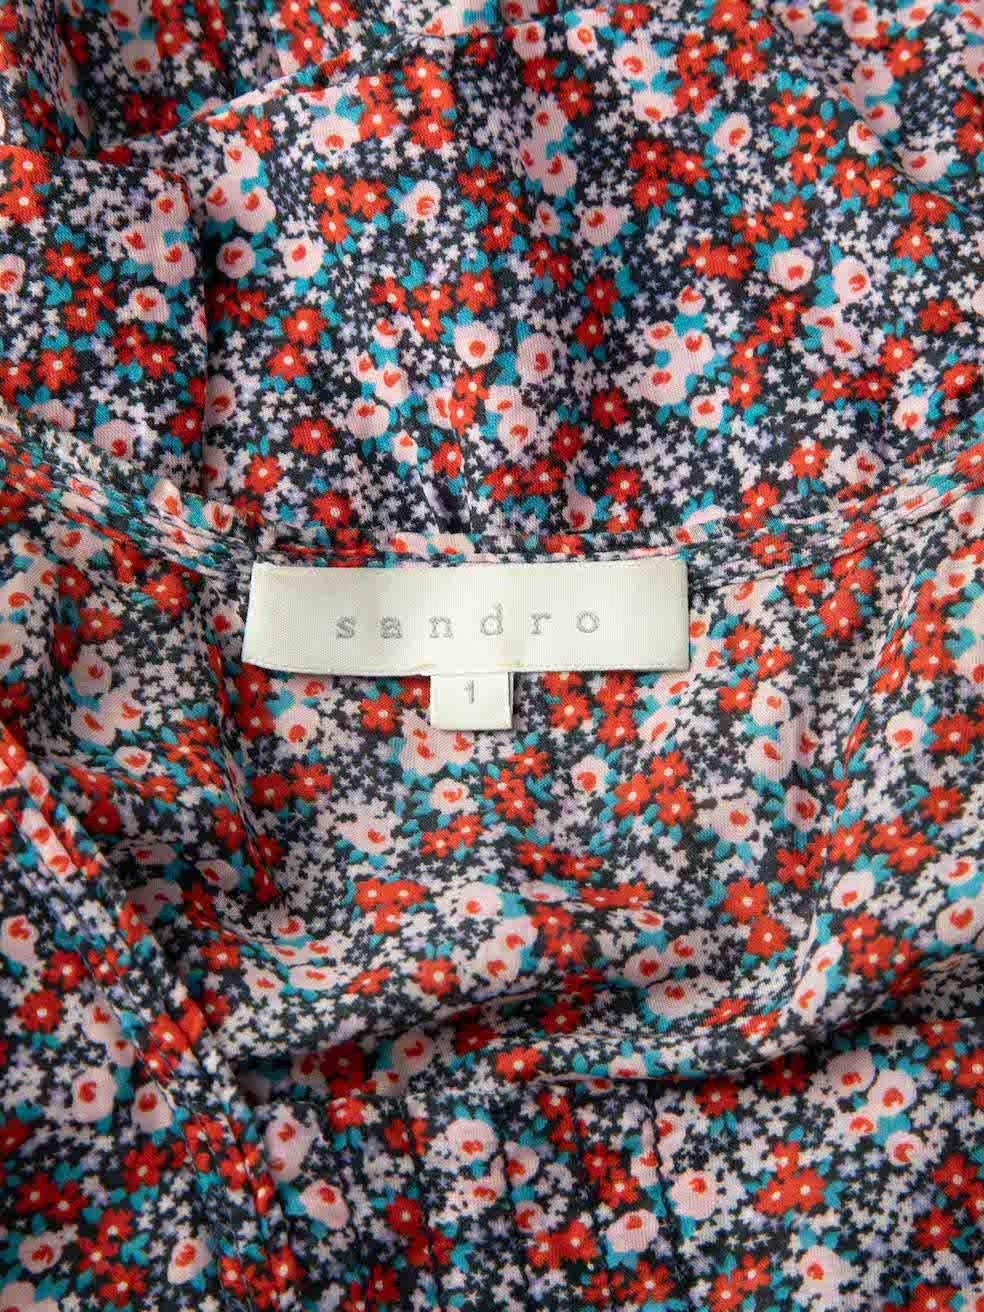 Floral Print Ruffle Tank Top Size S In Good Condition For Sale In London, GB